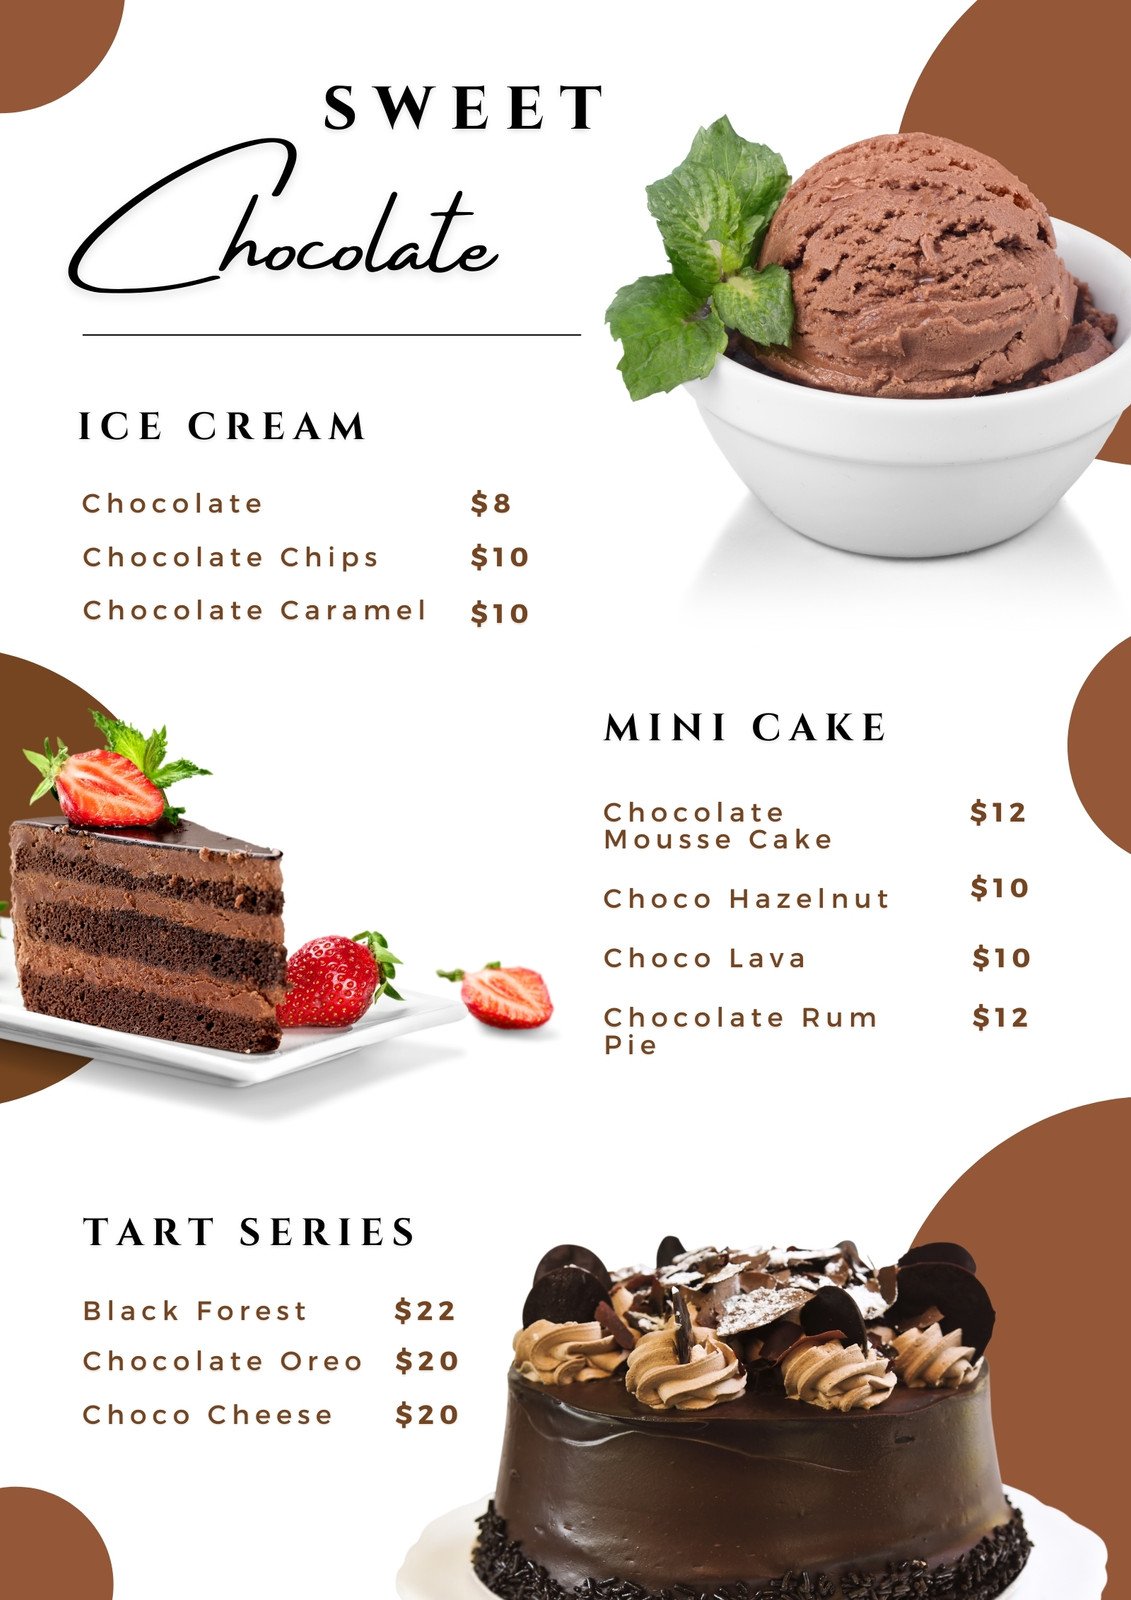 Cake shop price list three folds template image_picture free download  400793974_lovepik.com